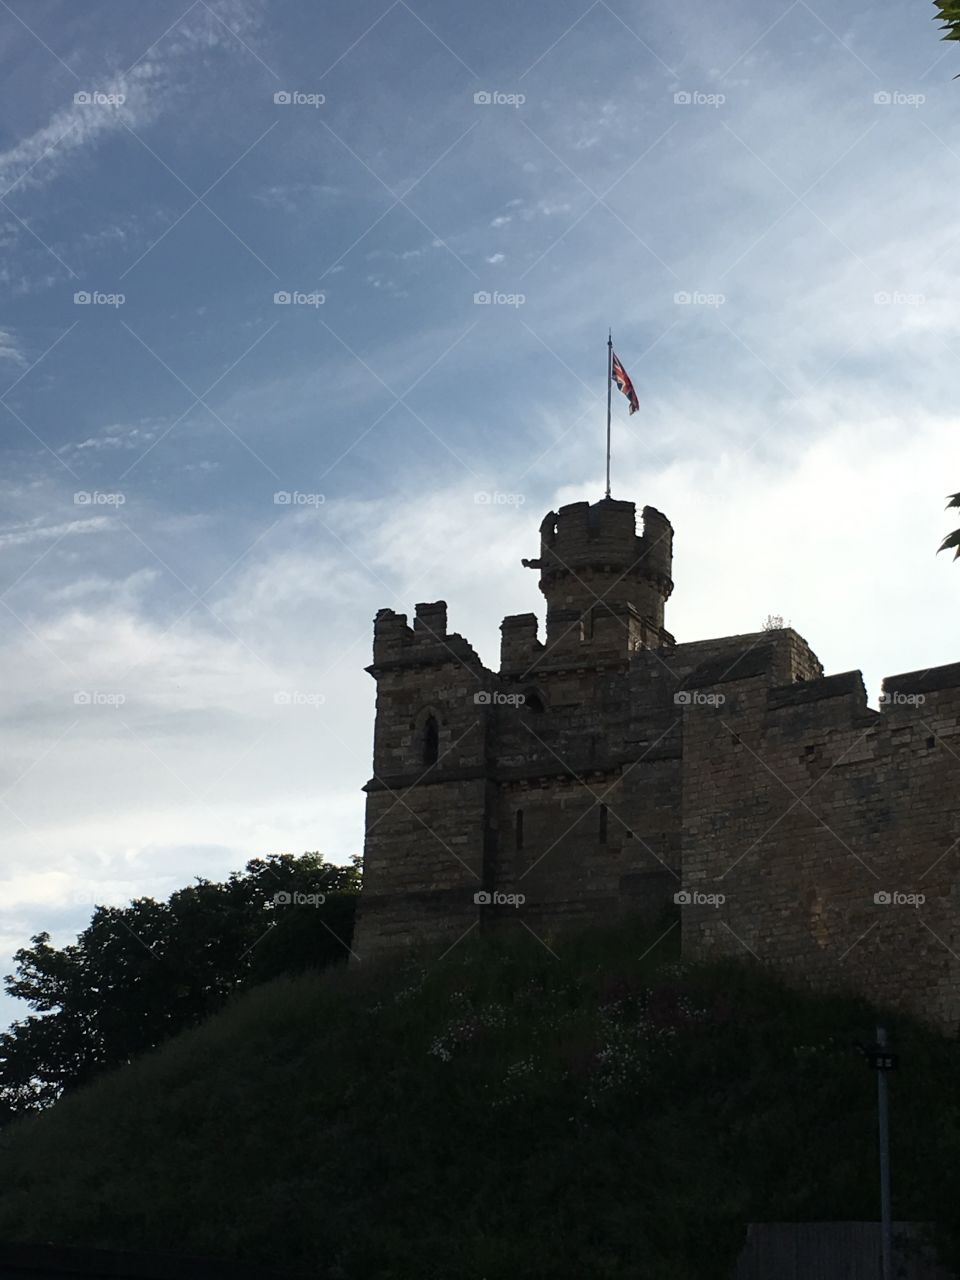 The observatory tower on a motte mound at Lincoln Castle flying the flag against a summer sky 